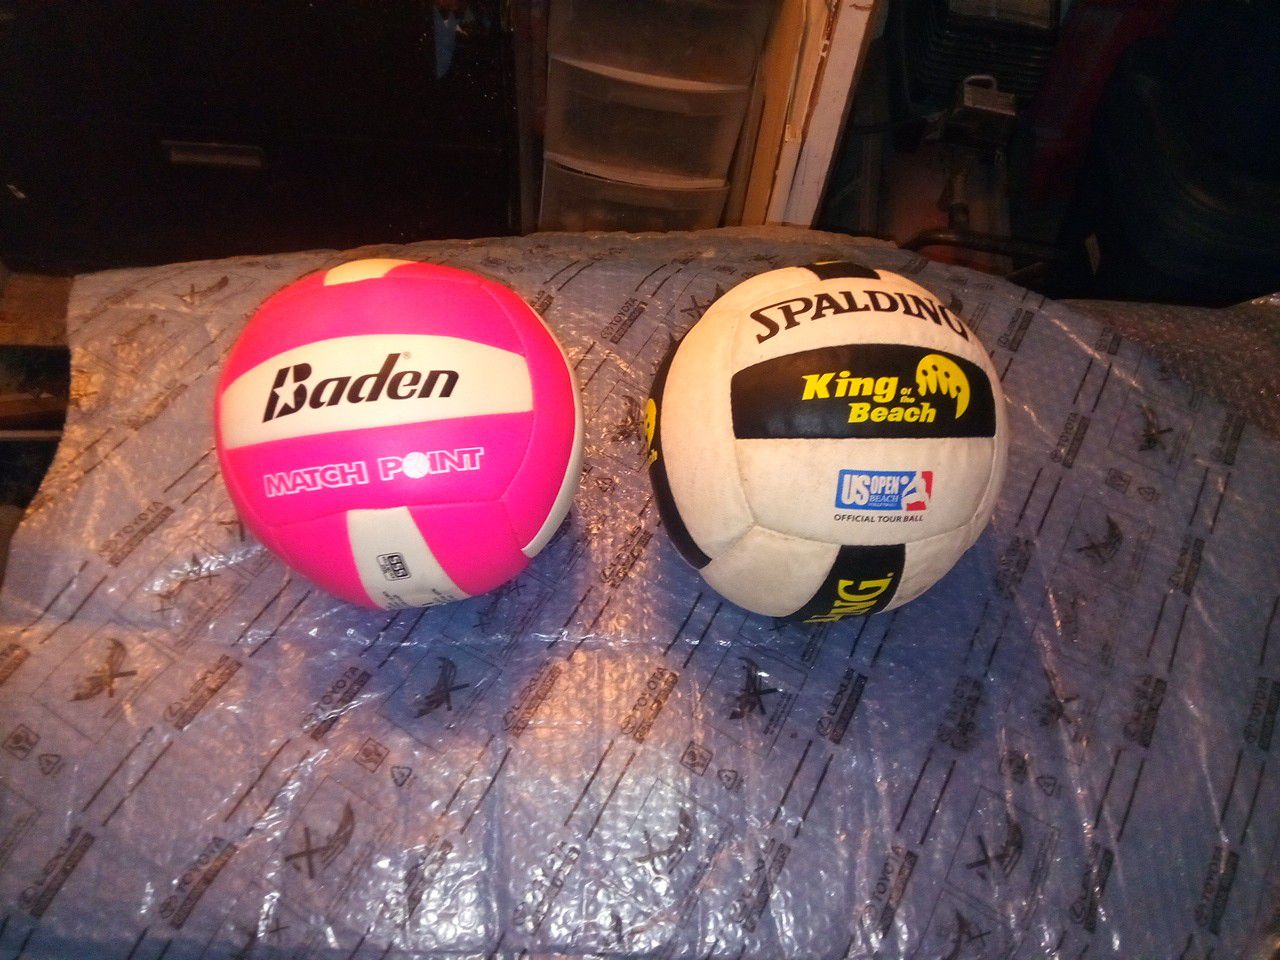 Baden match point and spalding king of the beach volleyballs